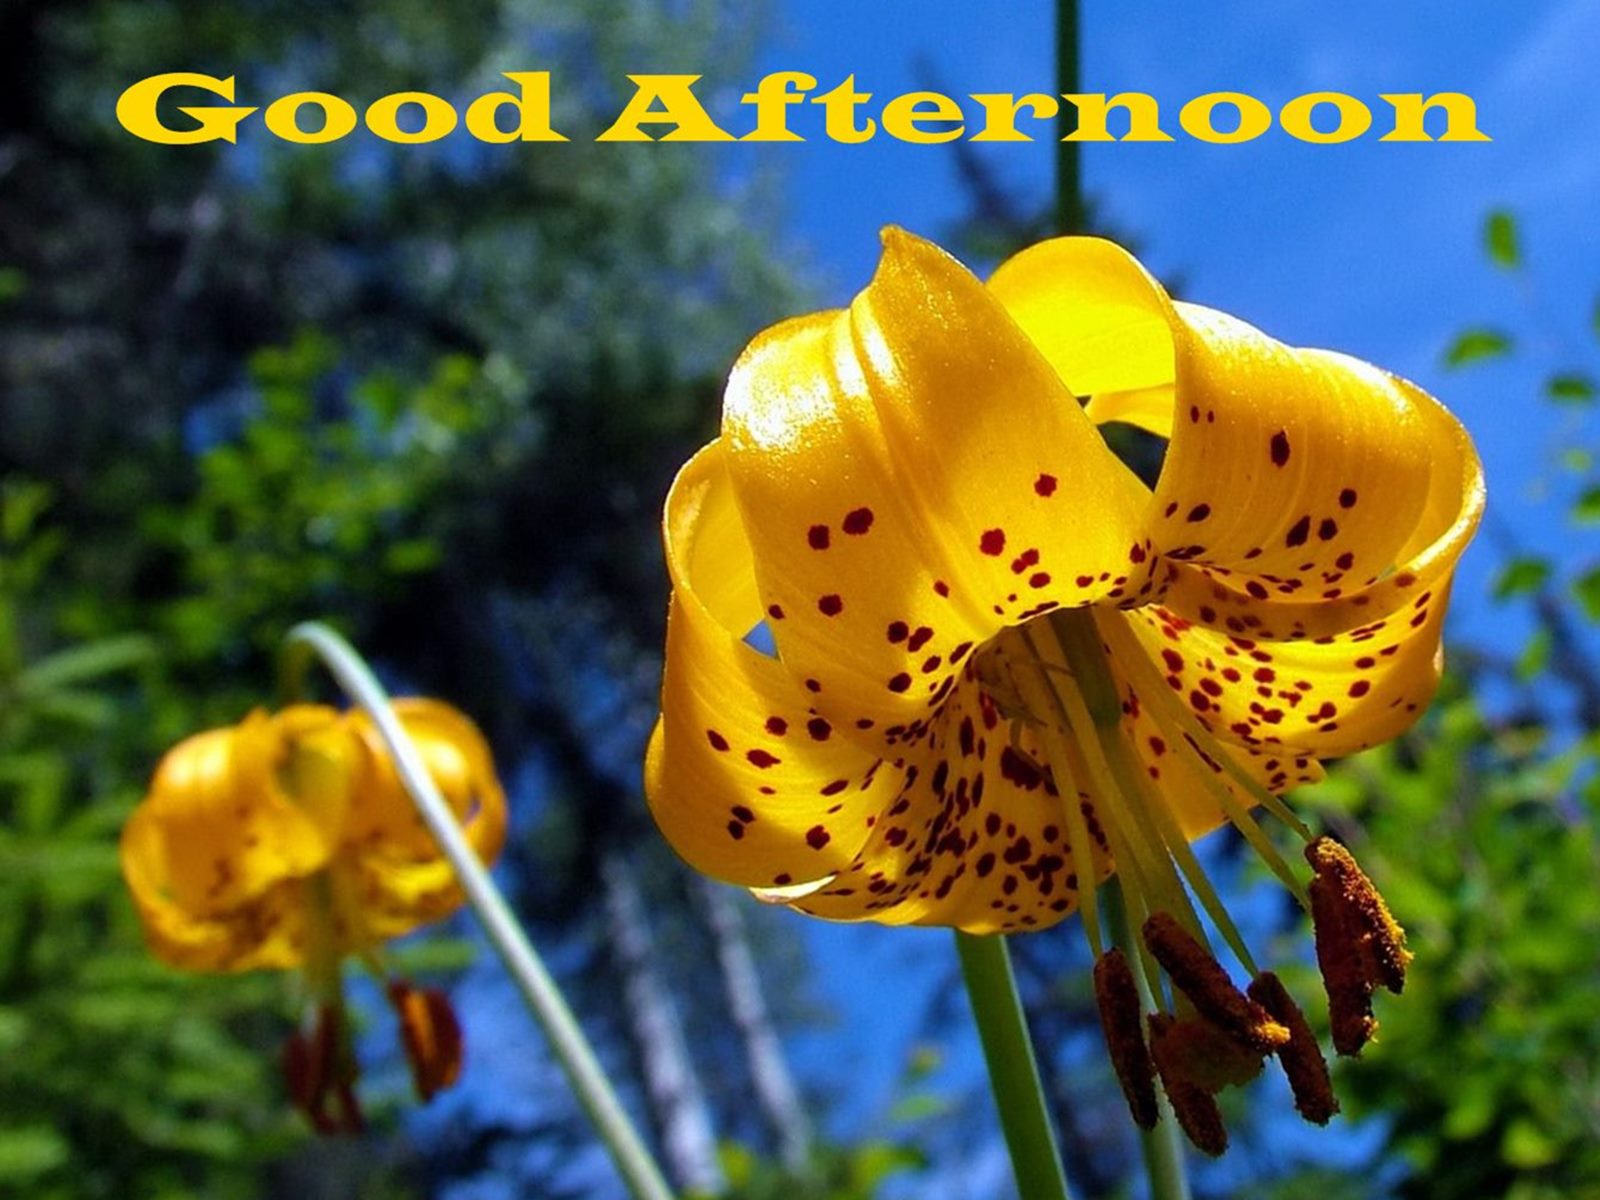 Good Afternoon Yellow Lily Flowers Hd Wallpaper - Good Afternoon Hd Images  With Flowers - 1600x1200 Wallpaper 